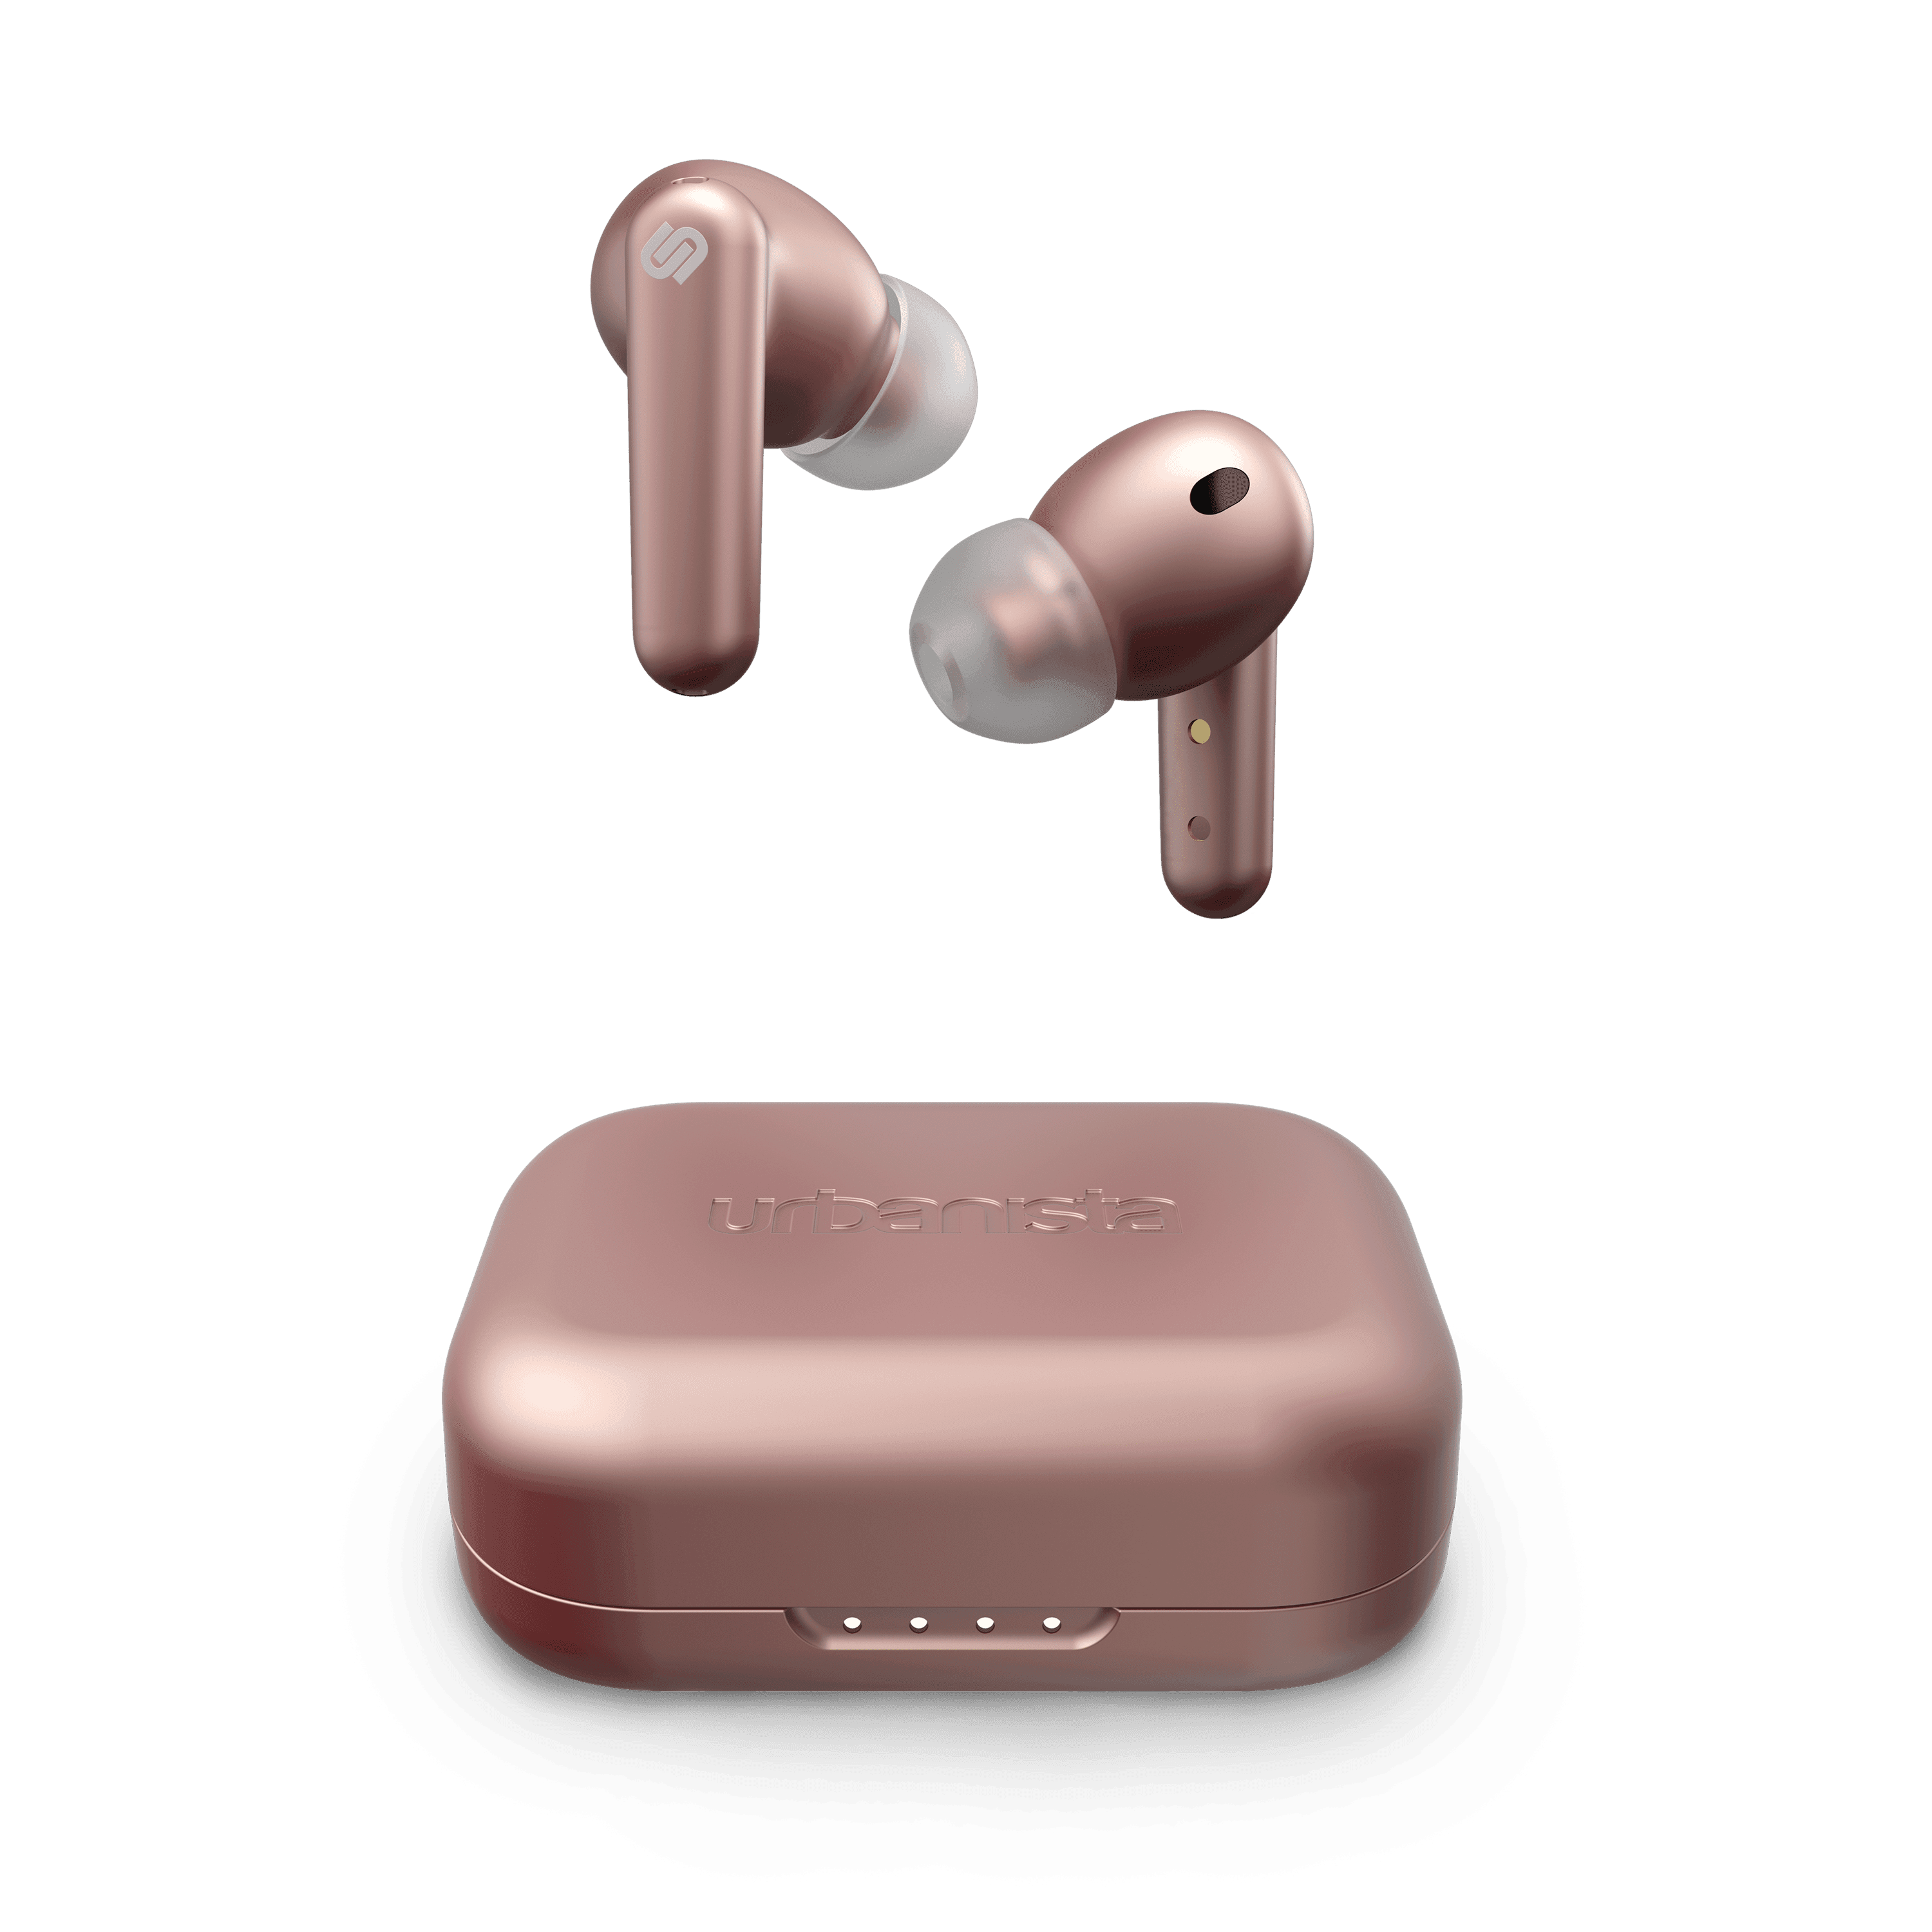 urbanista london active noise cancelling true wireless earphone bluetooth 5 0 25hr battery life touch control in ear detection wireless charging for smartphones tablets pcs laptops pink